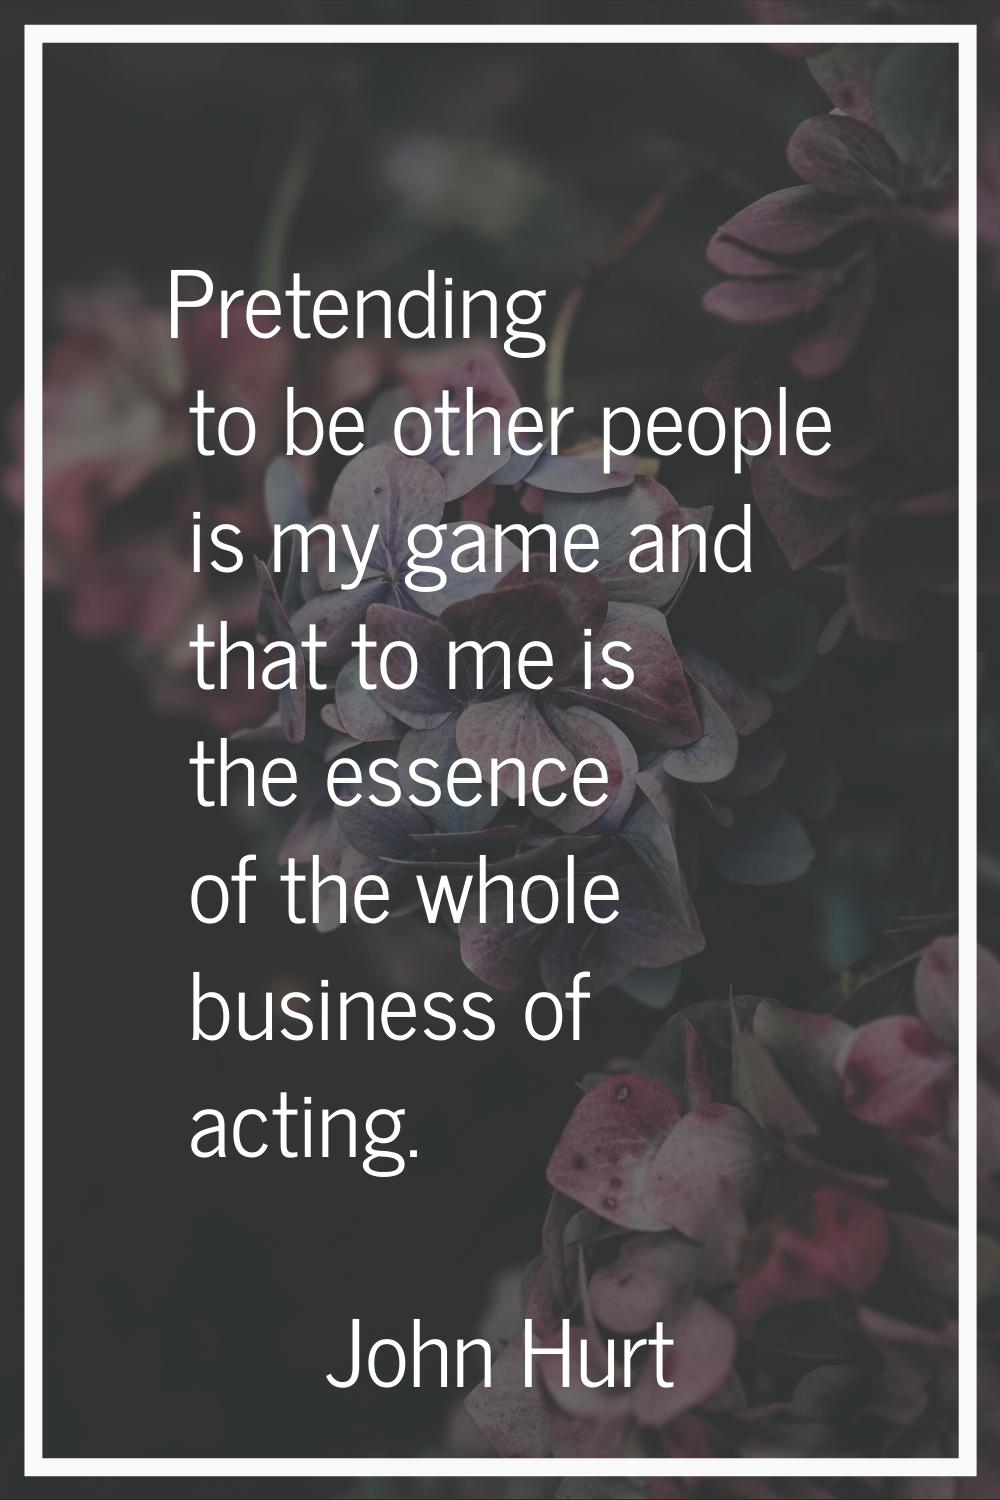 Pretending to be other people is my game and that to me is the essence of the whole business of act